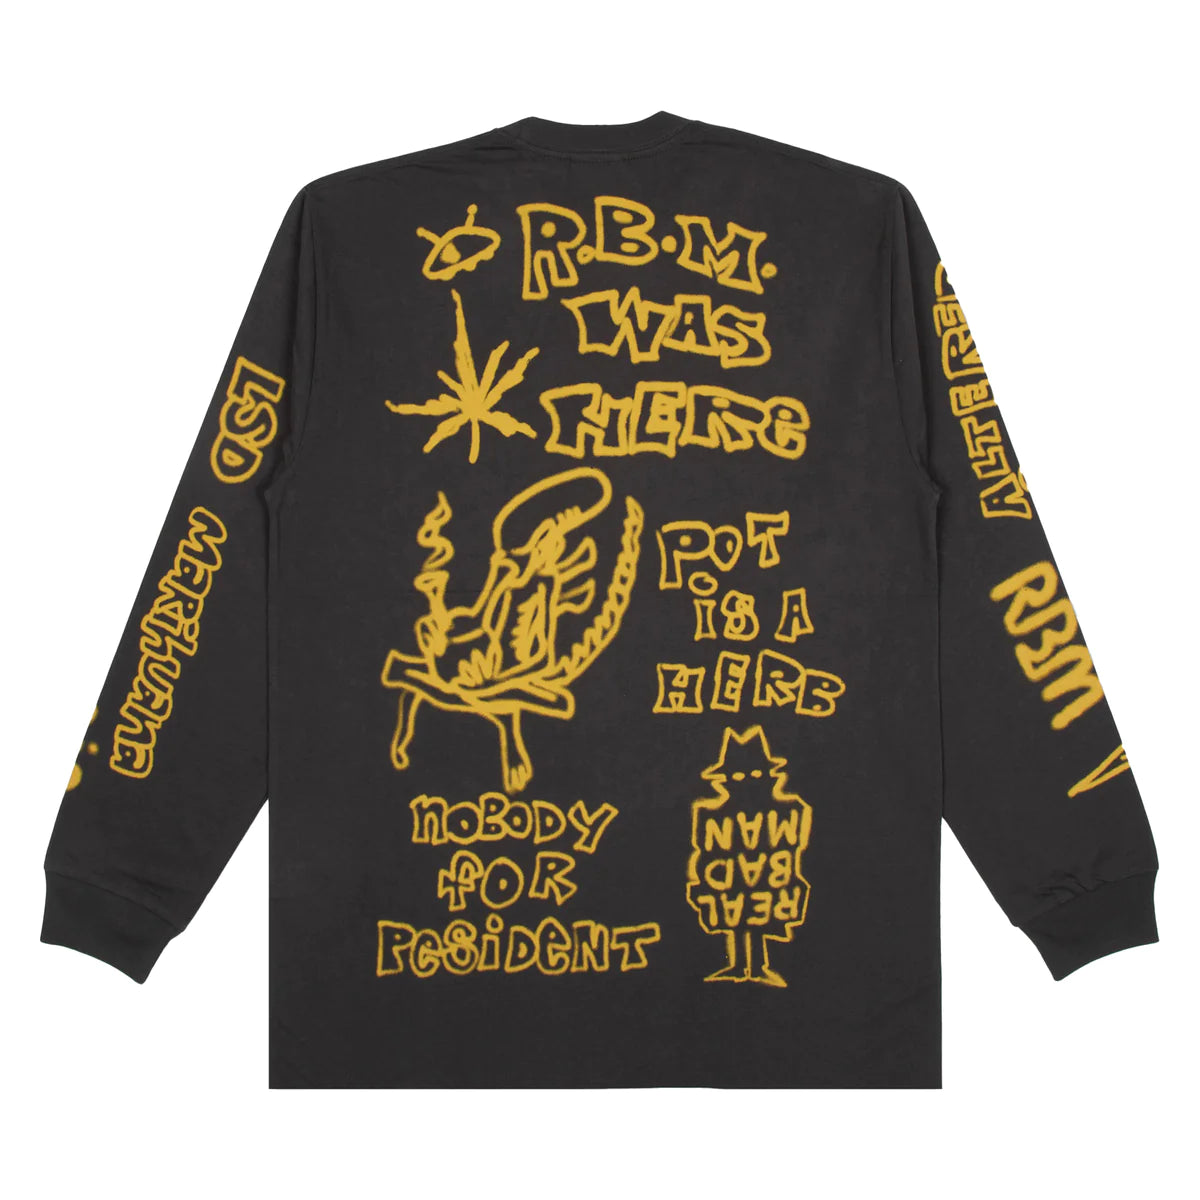 Real Bad Man Youth Party Longsleeve T-Shirt Washed Black